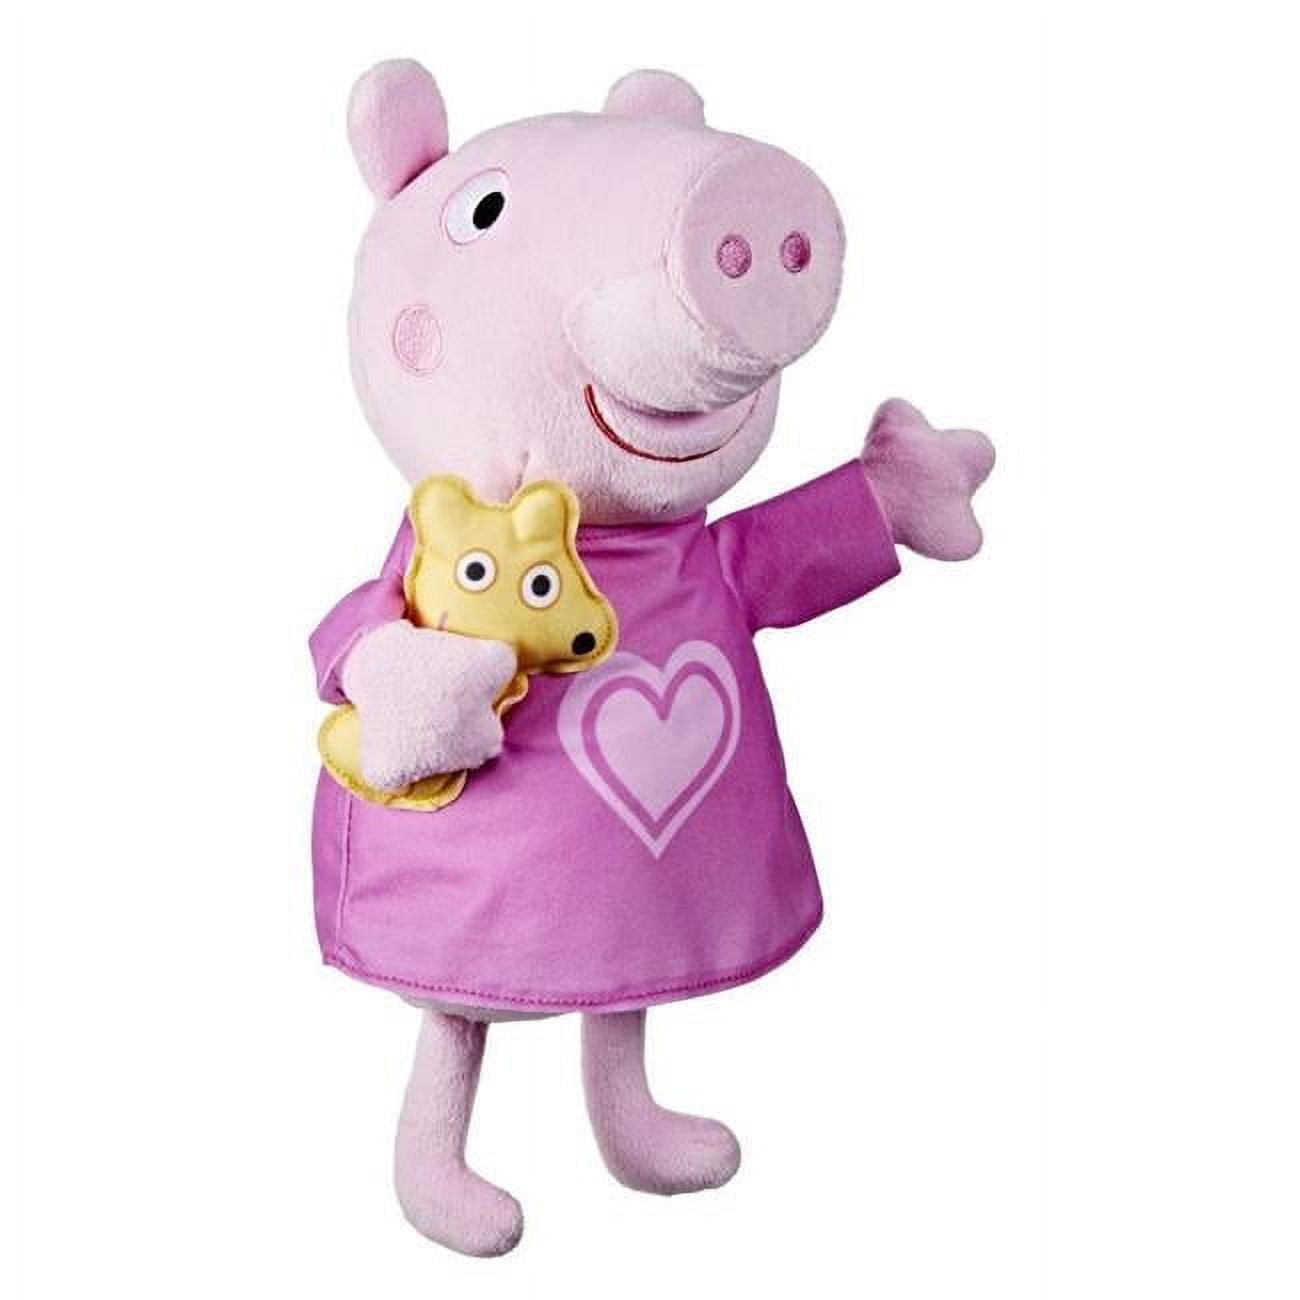 Picture of Hasbro HSBF3777 Peppa Pig Bedtime Lullabies Singing Plush Doll - Set of 2